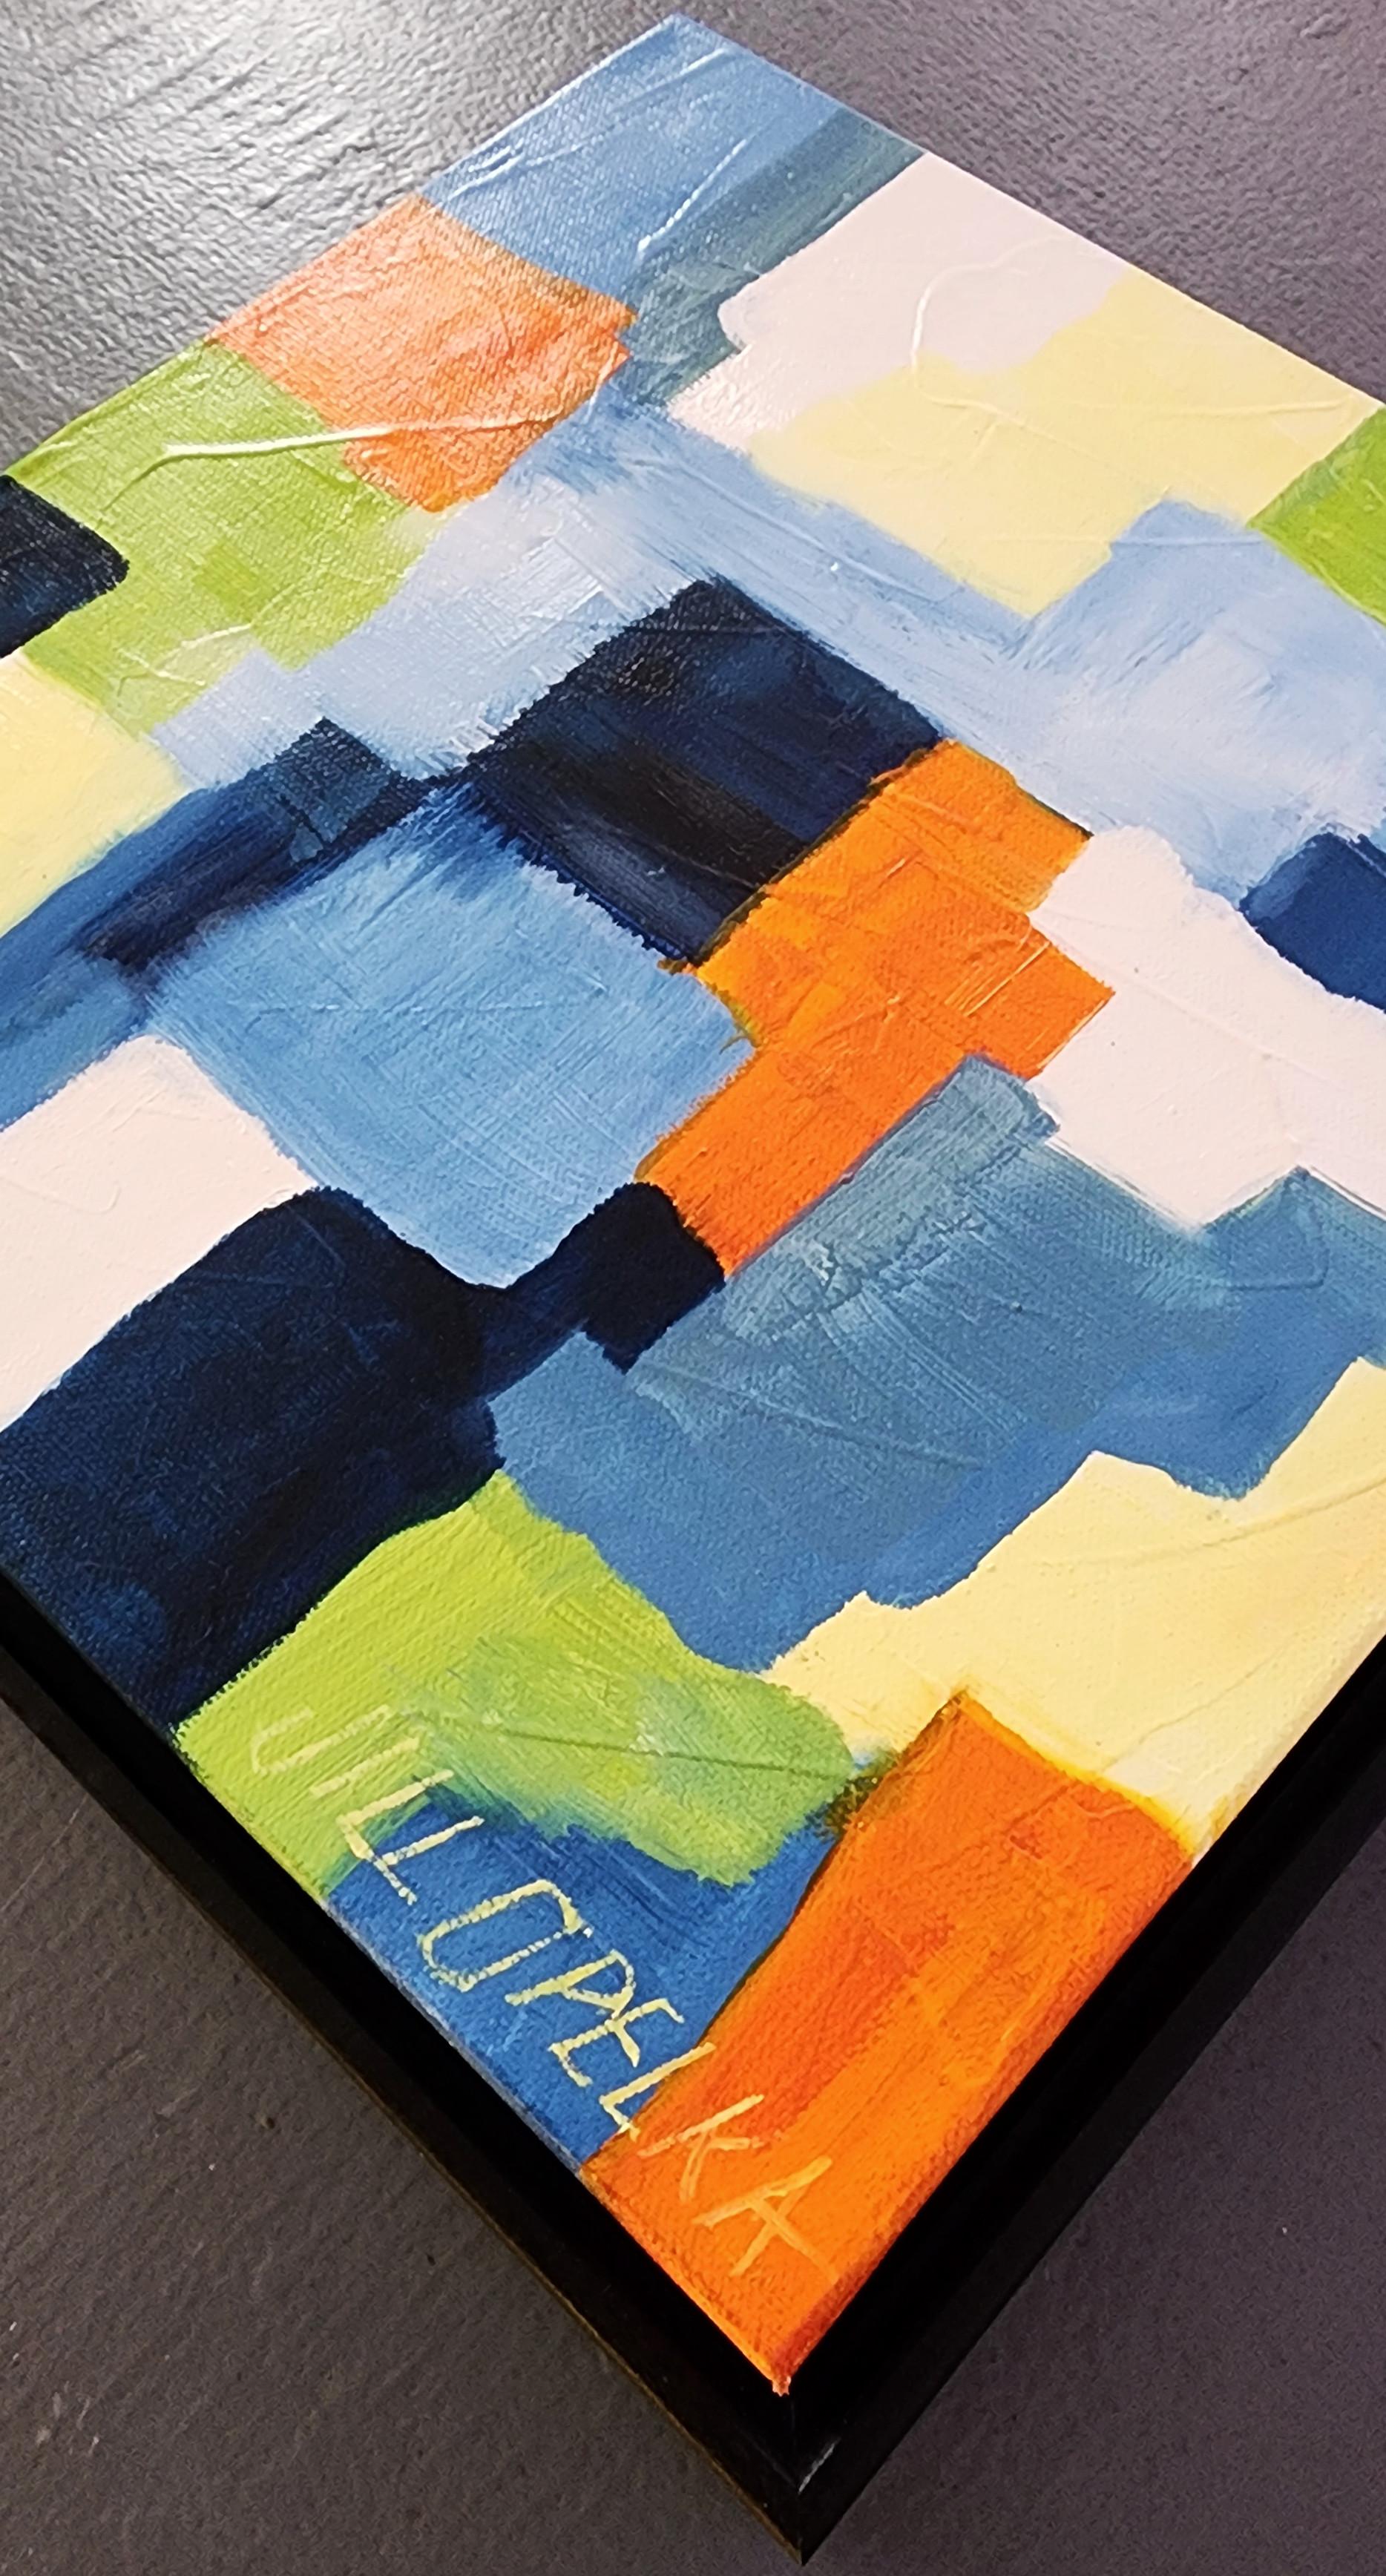 Jill Opelka
Abstract II
Oil on Canvas
Year: 2023
Size: 12x12in
Framed: 13x13x1.5in
Signed
COA provided
Ref.: 924802-2049

Tags: Abstract, Vibrant, Deep, Blue, Navy, Green, Orange, Yellow

*Framed in a black wooden frame



-----------------



Upon